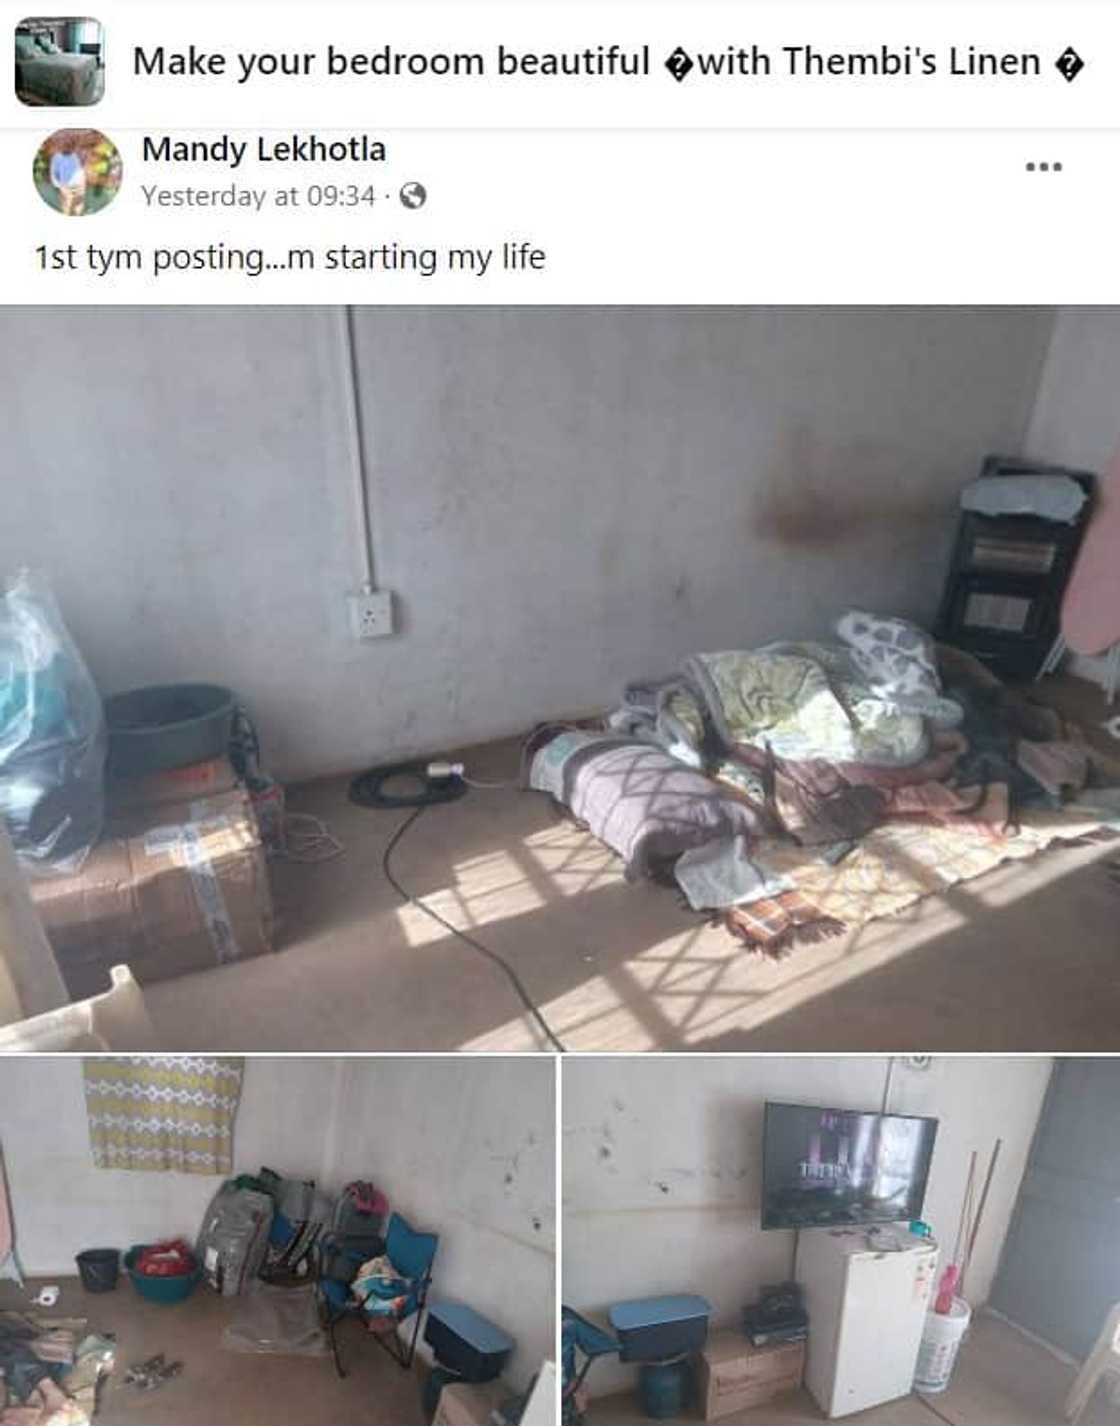 Woman shows the interior of her home.